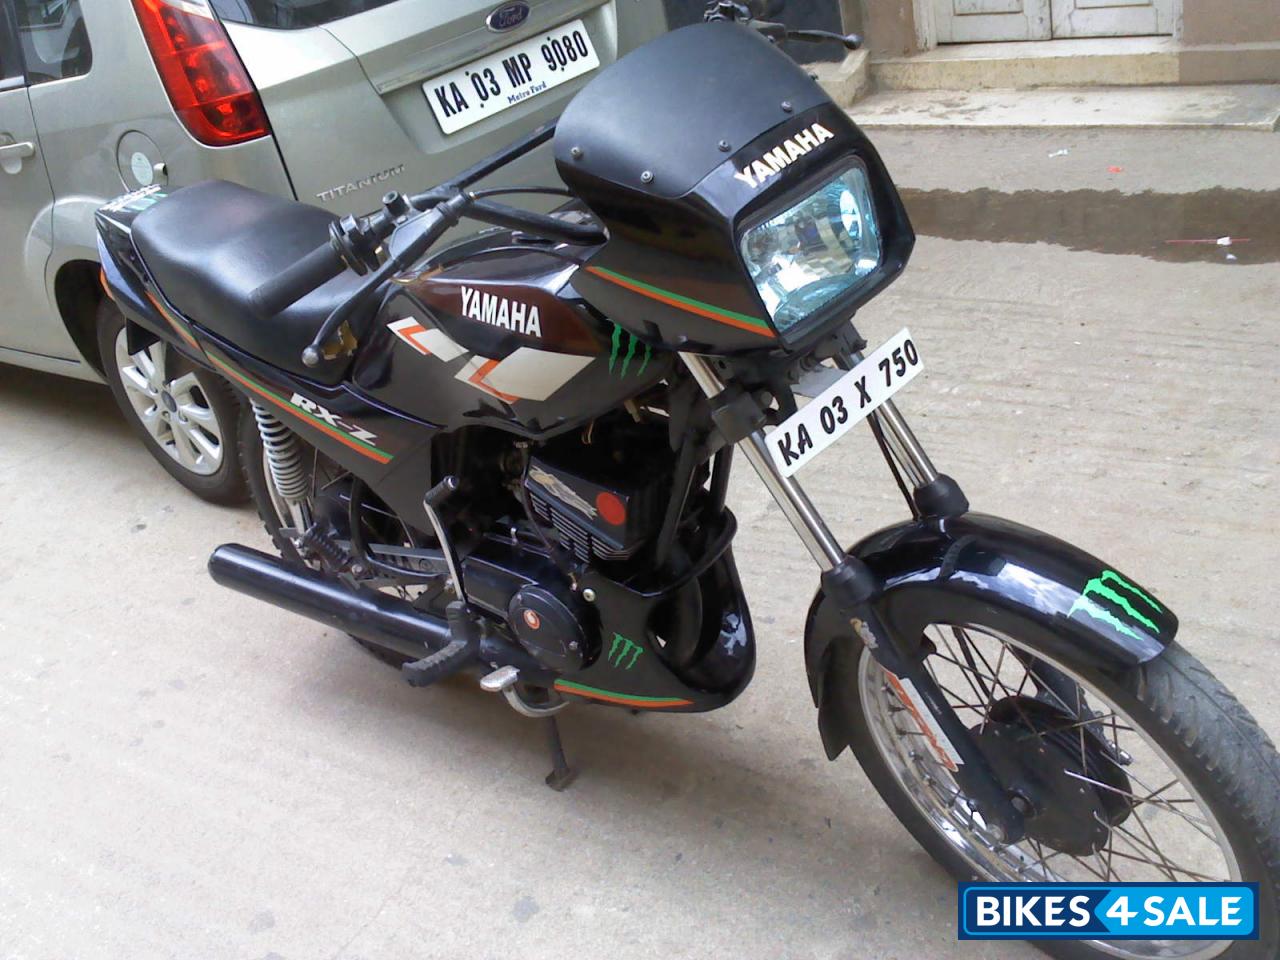 Pictures of Yamaha Rxz Picture 2 Bike Id Is 87784 Motorcycle Located In 